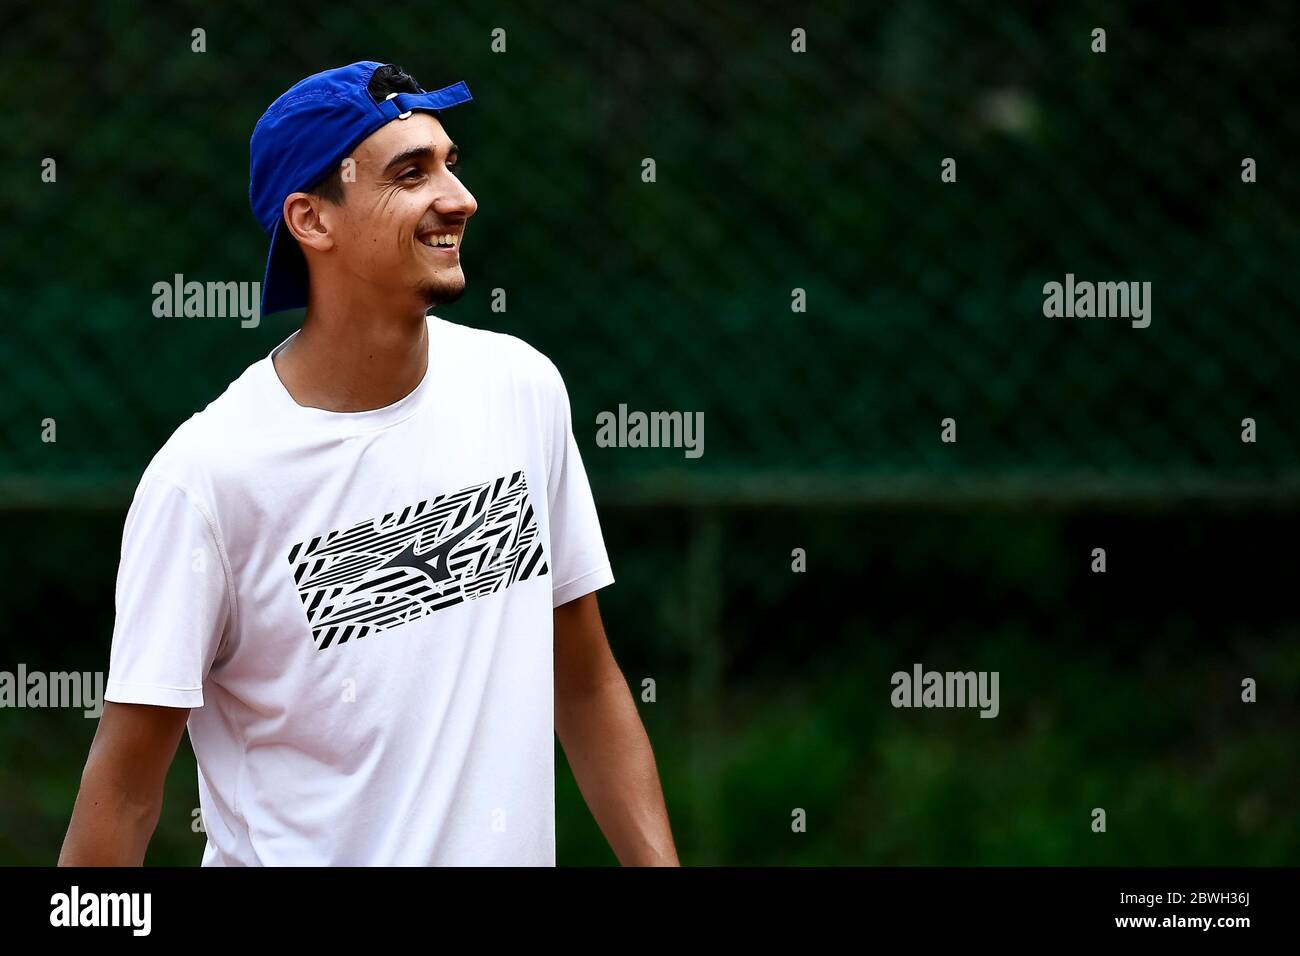 Turin, Italy - 01 June, 2020: Lorenzo Sonego, currently number 46 of ATP ranking, smiles during a tennis training. Athletes have started training again after the lockdown caused by COVID-19 coronavirus. Credit: Nicolò Campo/Alamy Live News Stock Photo